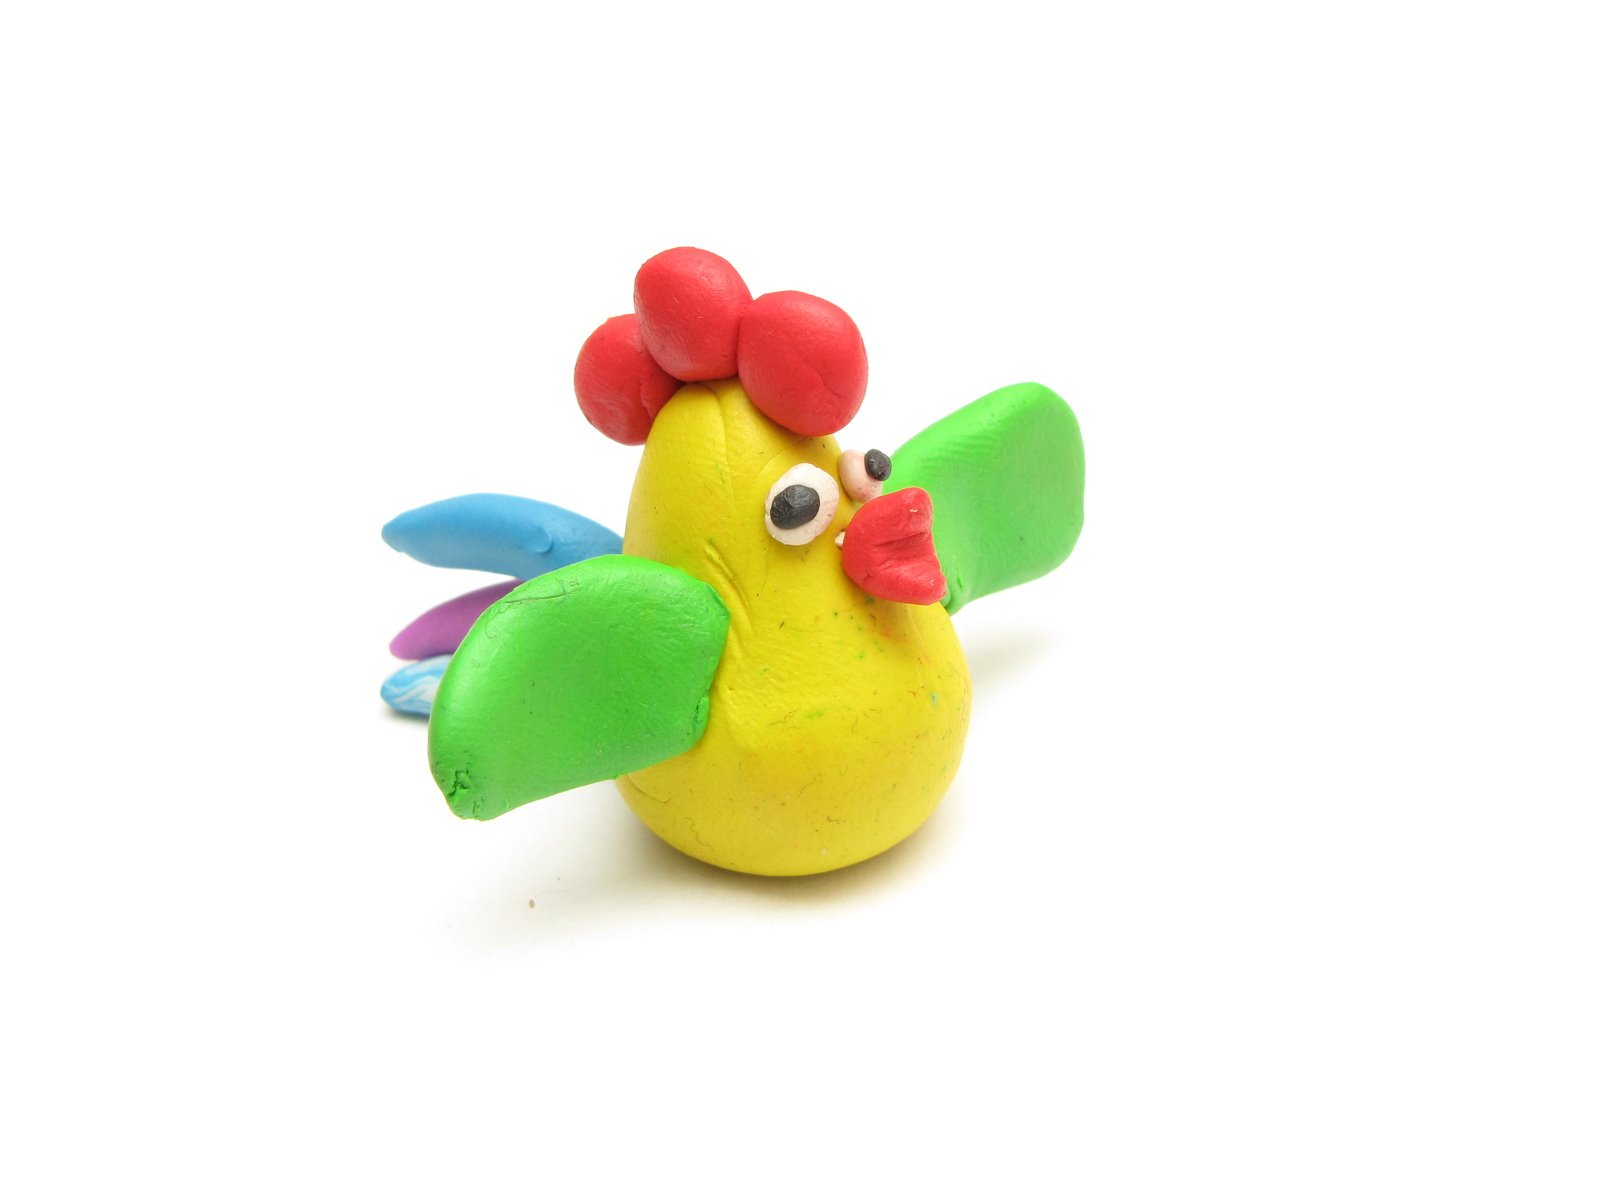 a rubber toy chicken is sitting on a white surface